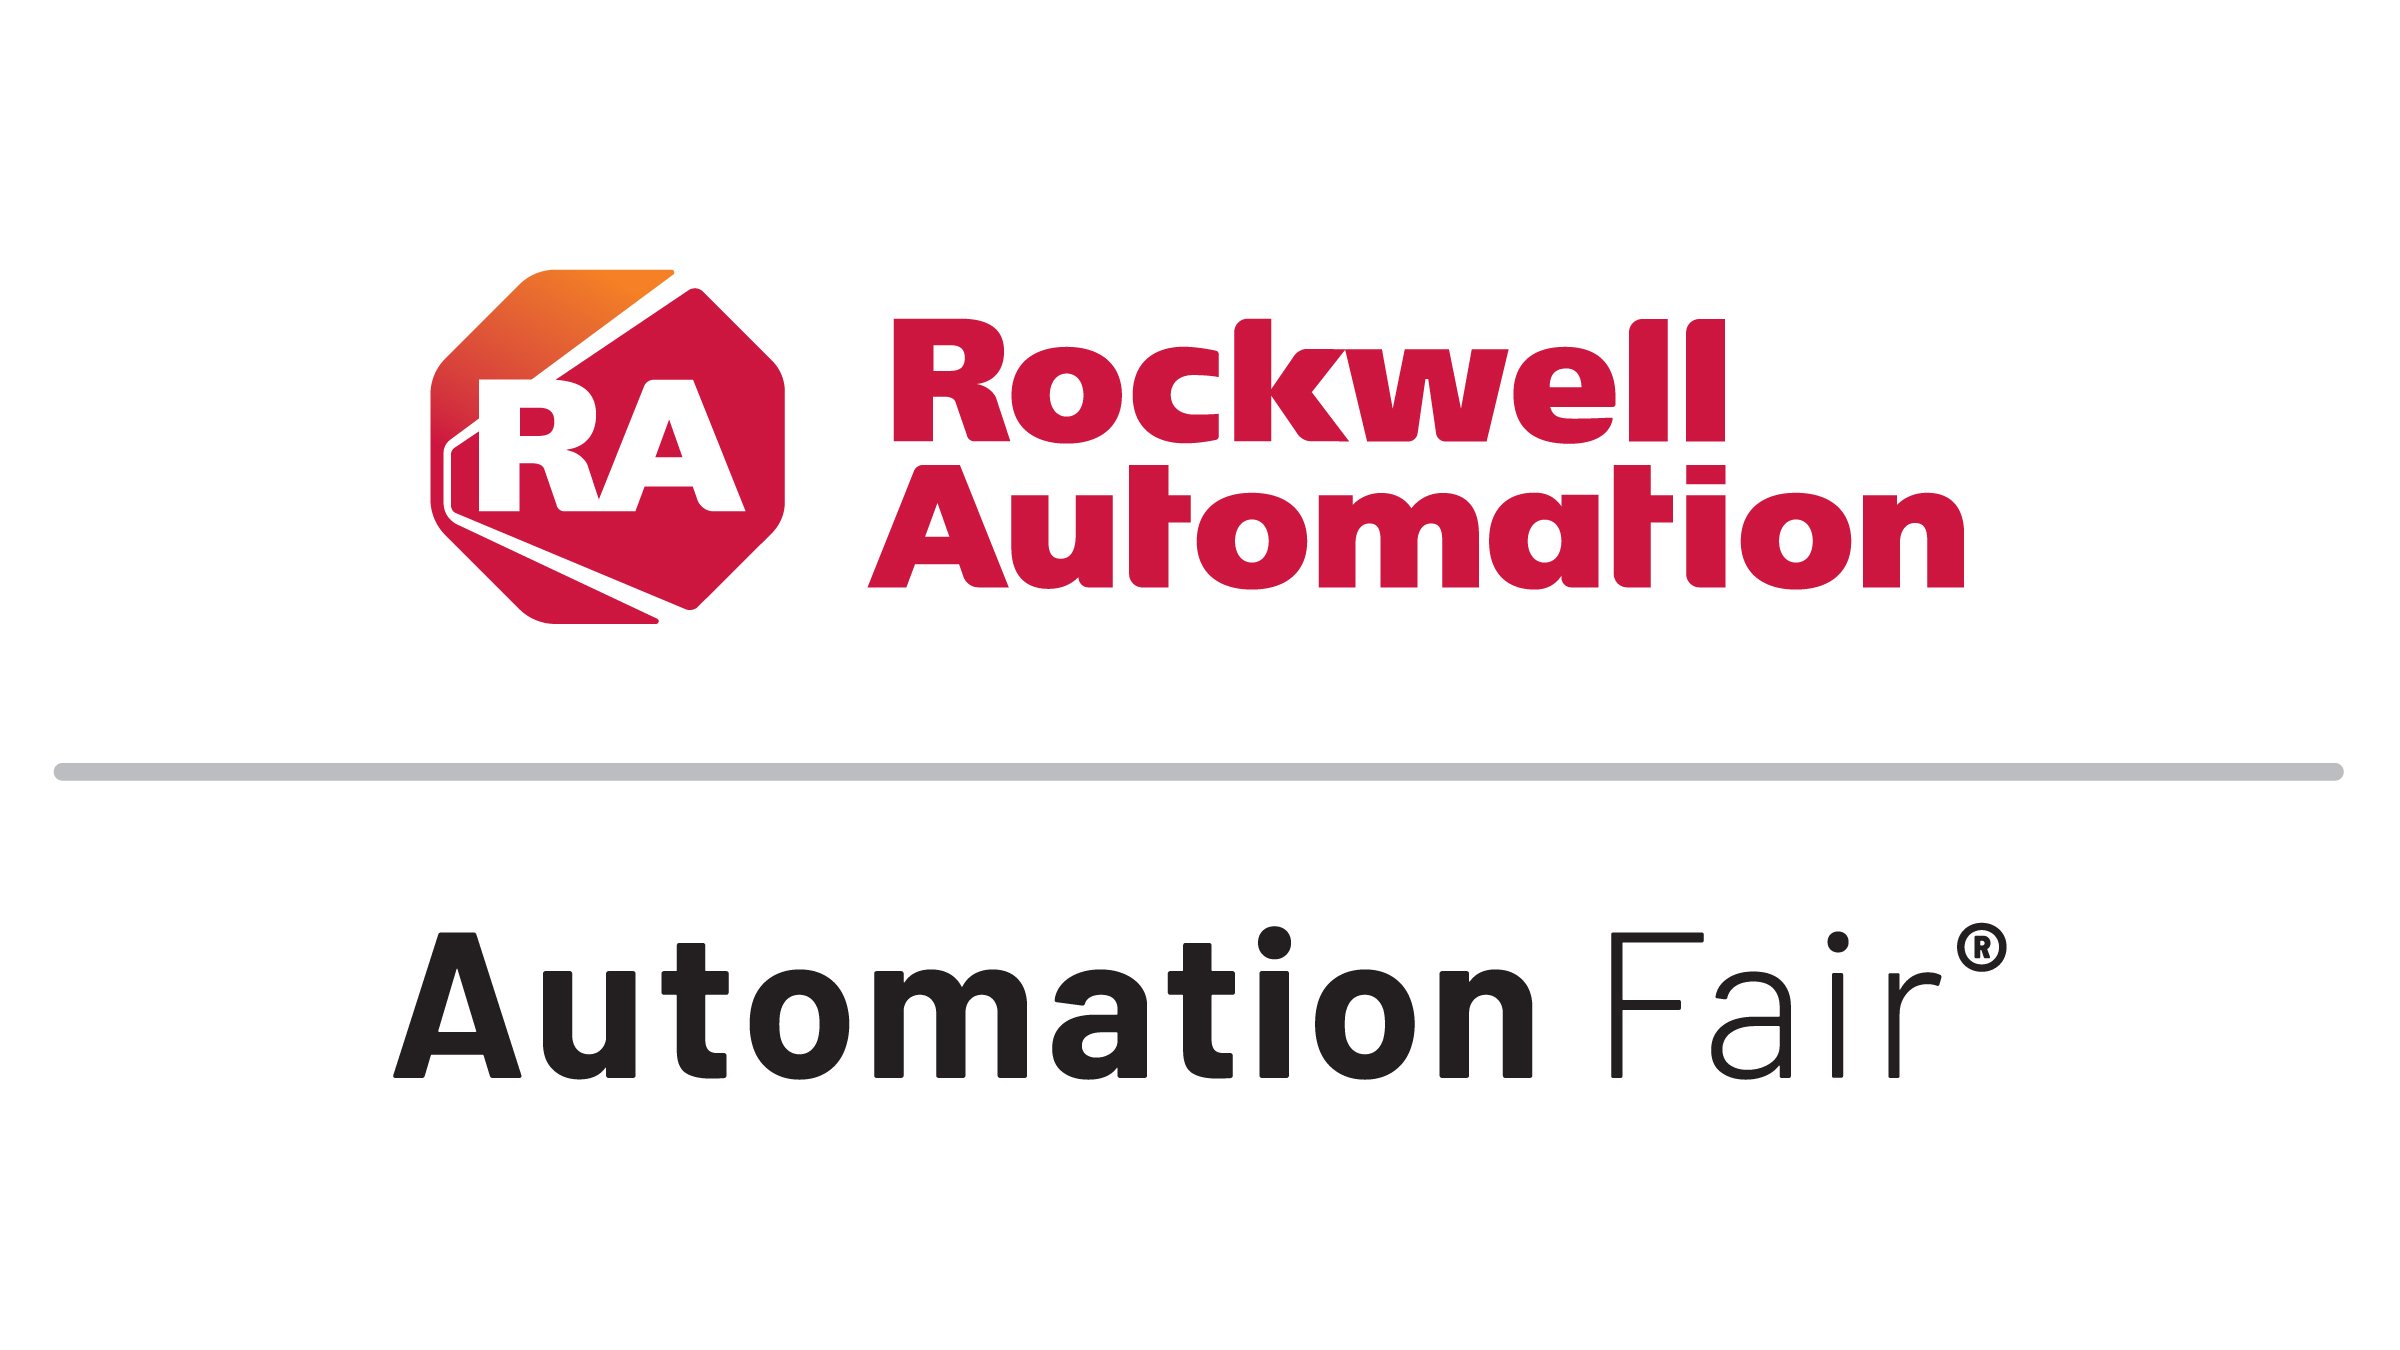 Red Rockwell Automation logo above a black Automation Fair logo